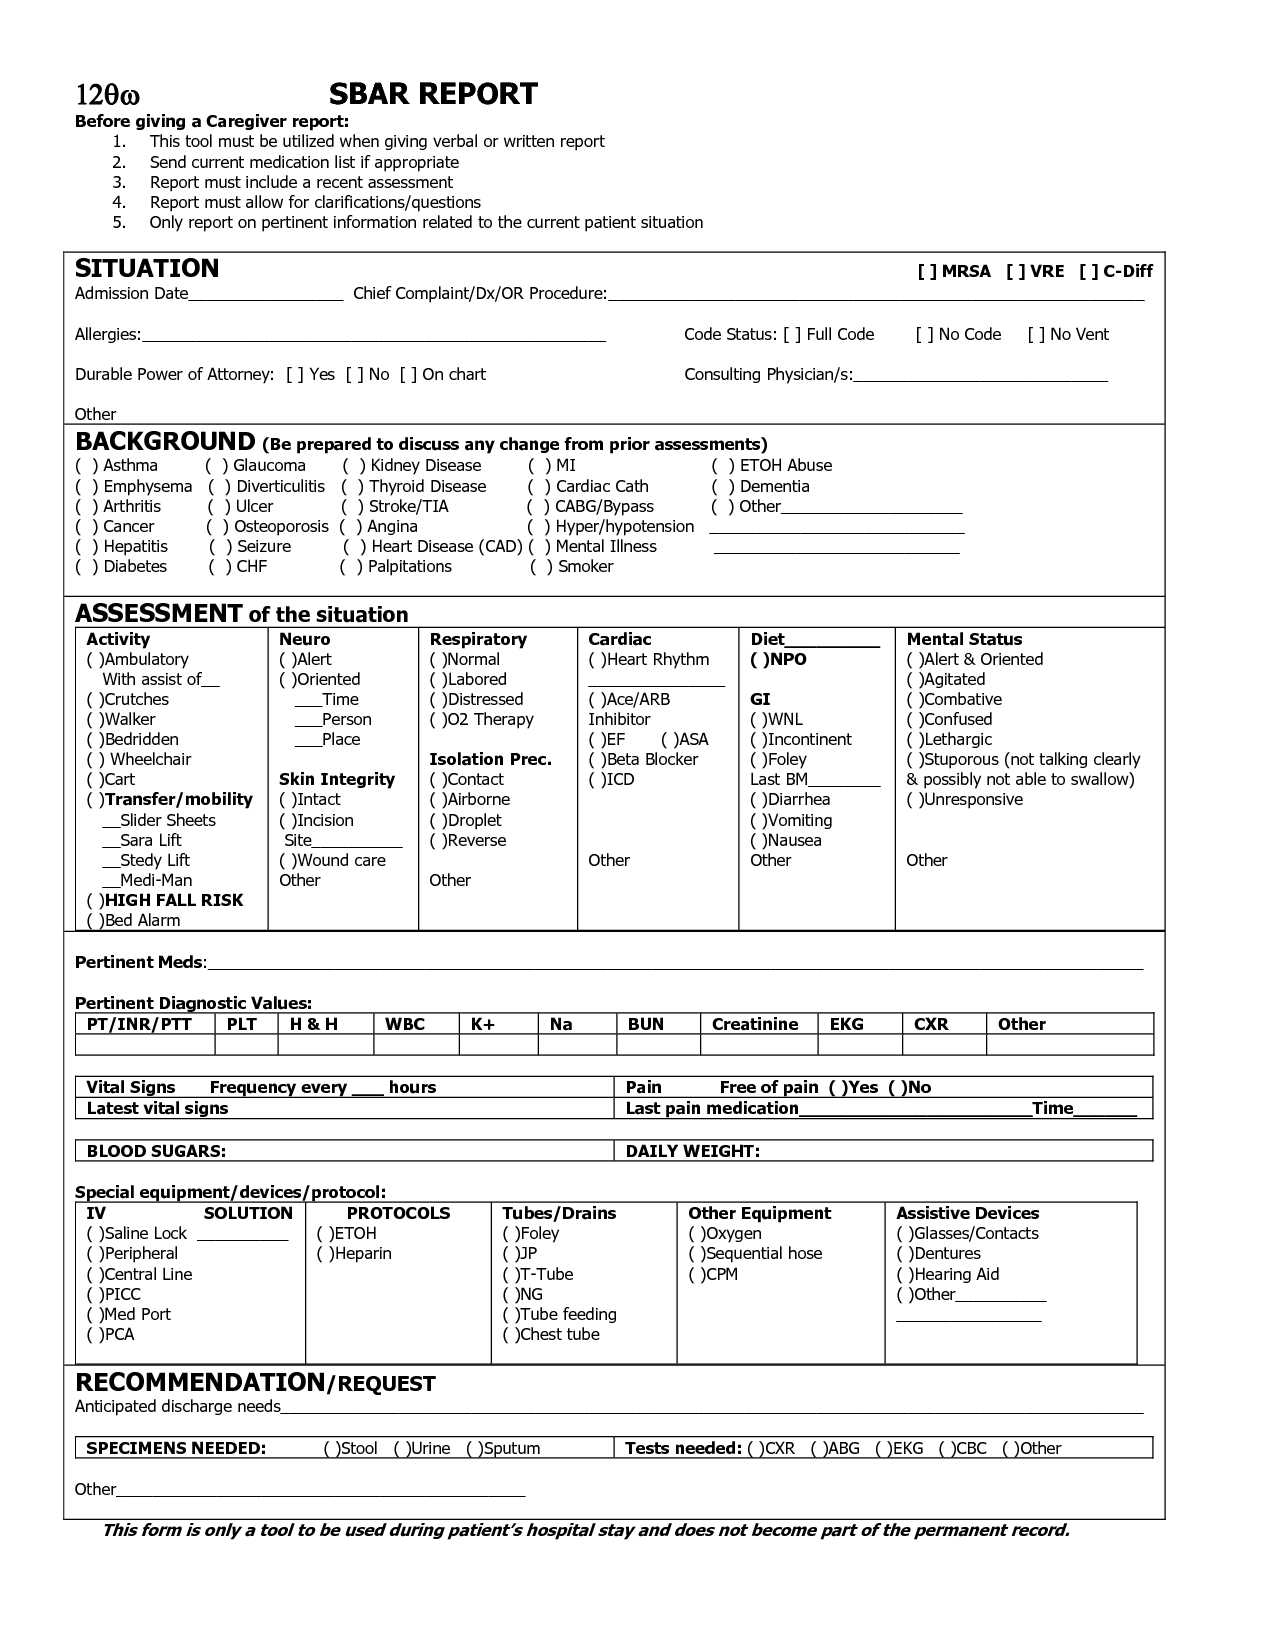 Person Centered Planning Worksheets together with Sbar format Template Bruceianwilliams